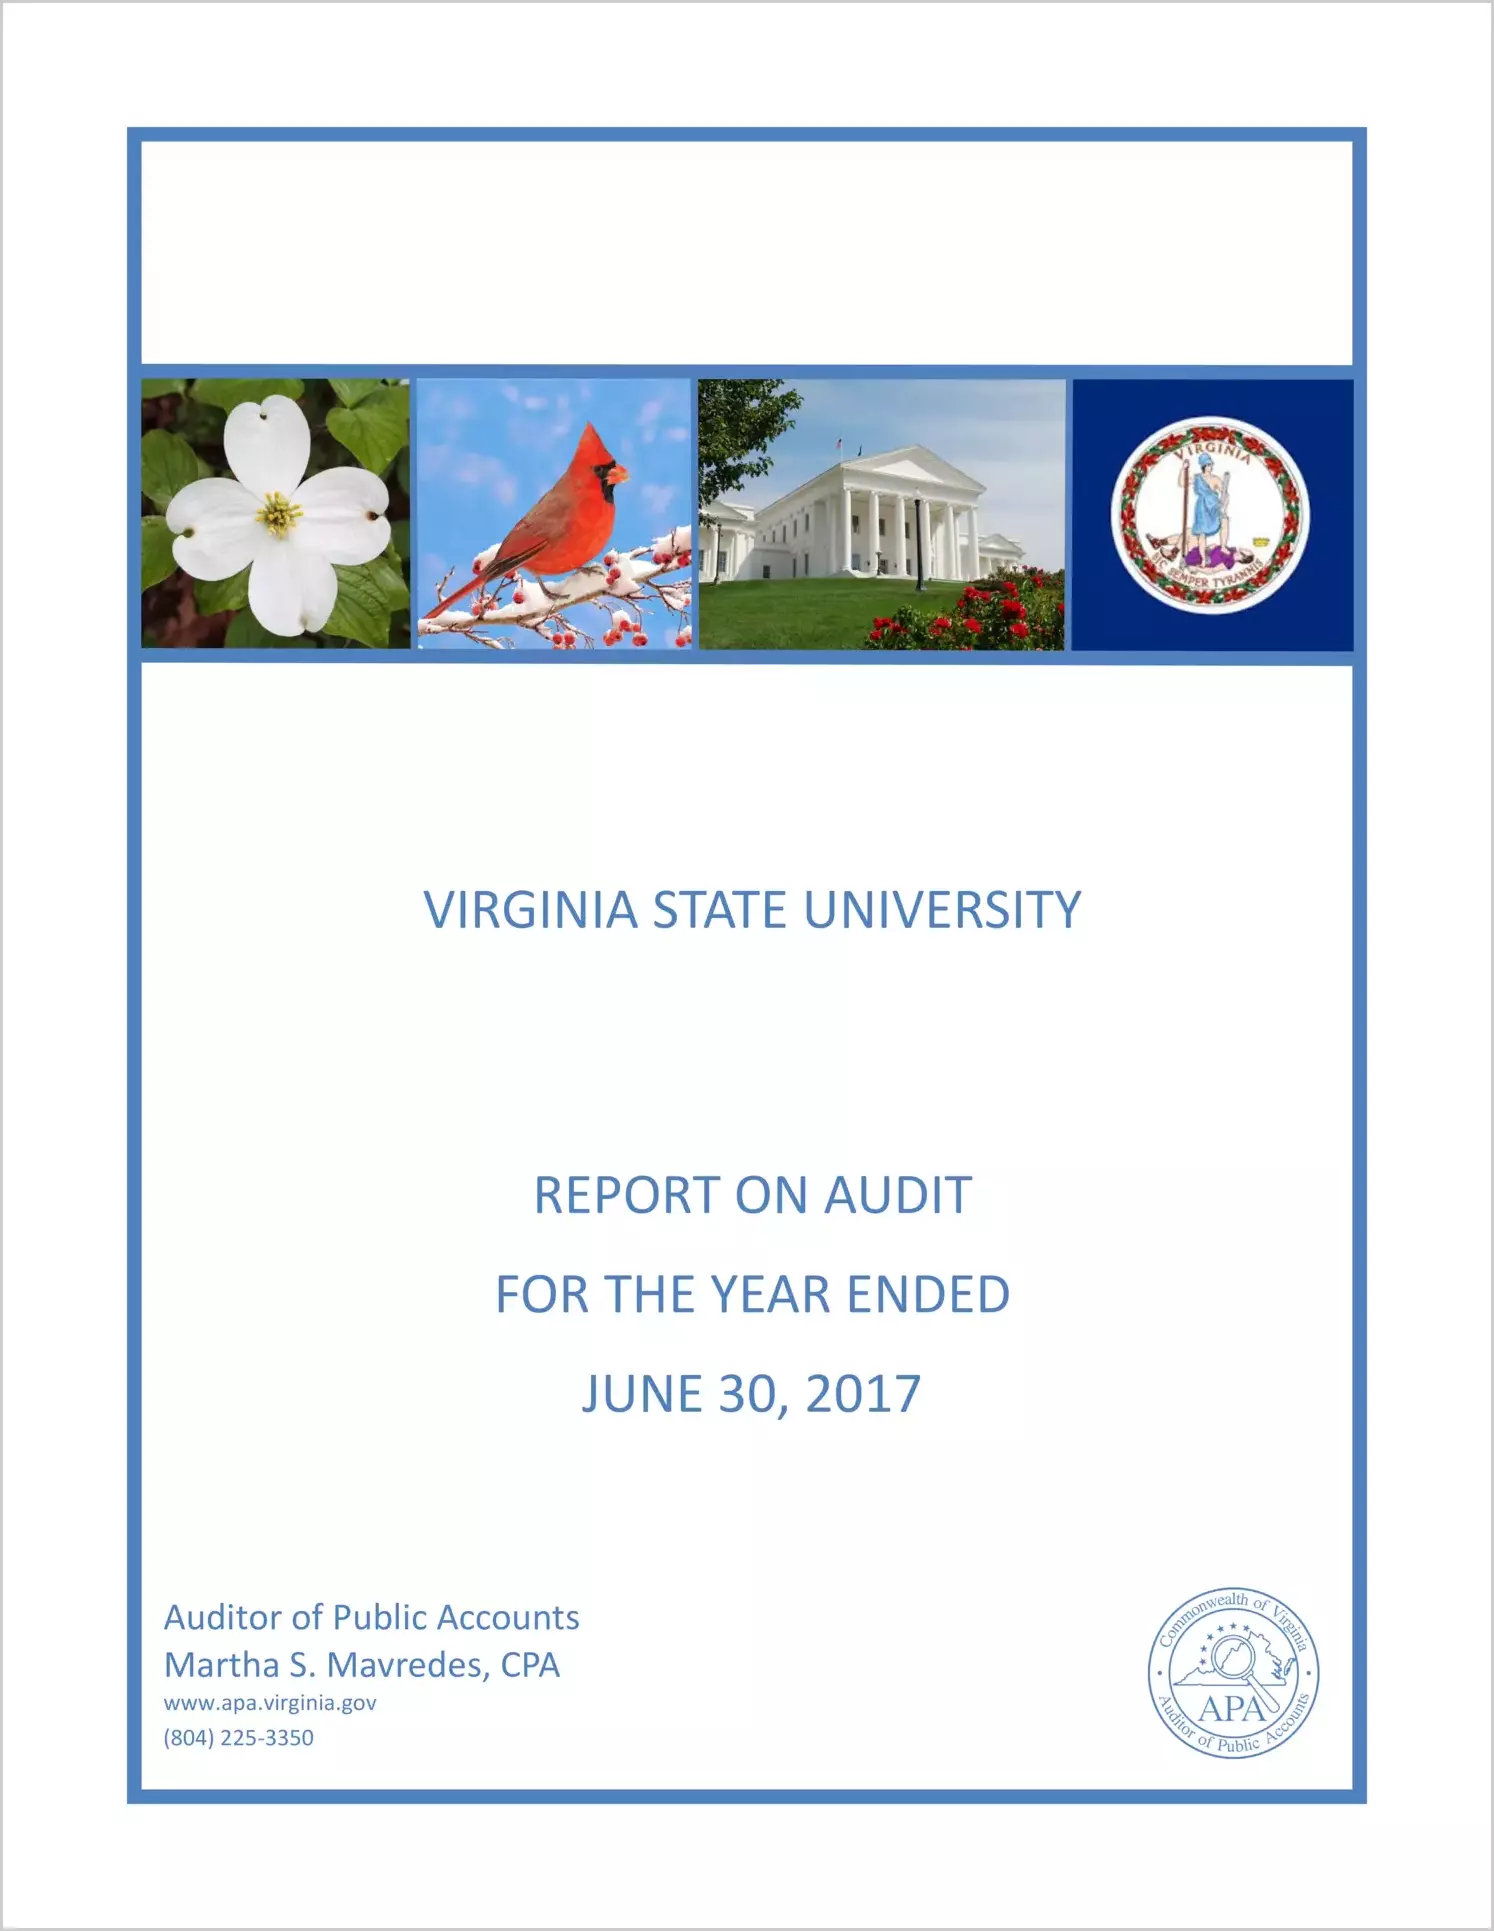 Virginia State University for the year ended June 30, 2017